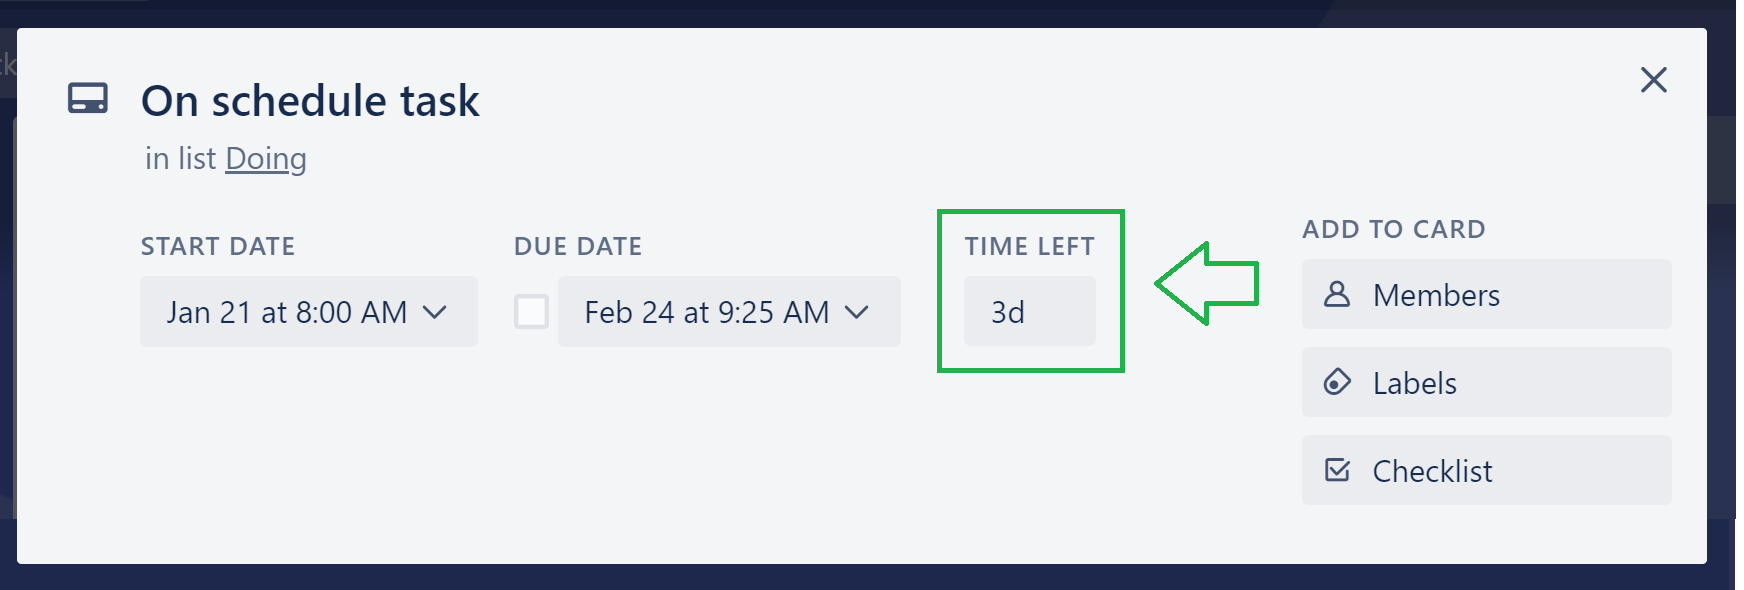 Display the time left before due date for a task